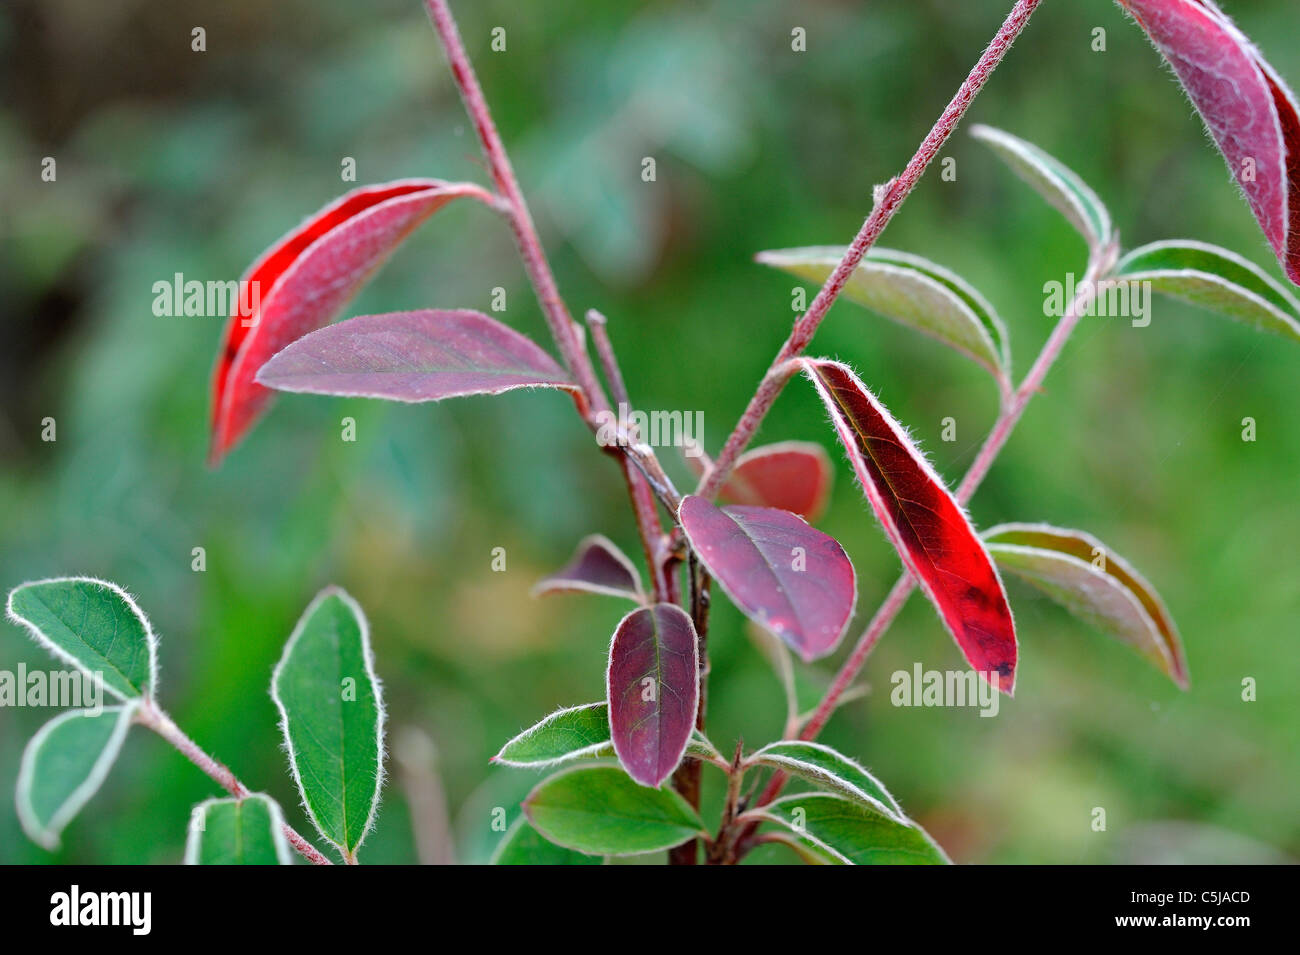 Bright red leaves of autumn on a species of cotoneaster shrub Stock Photo